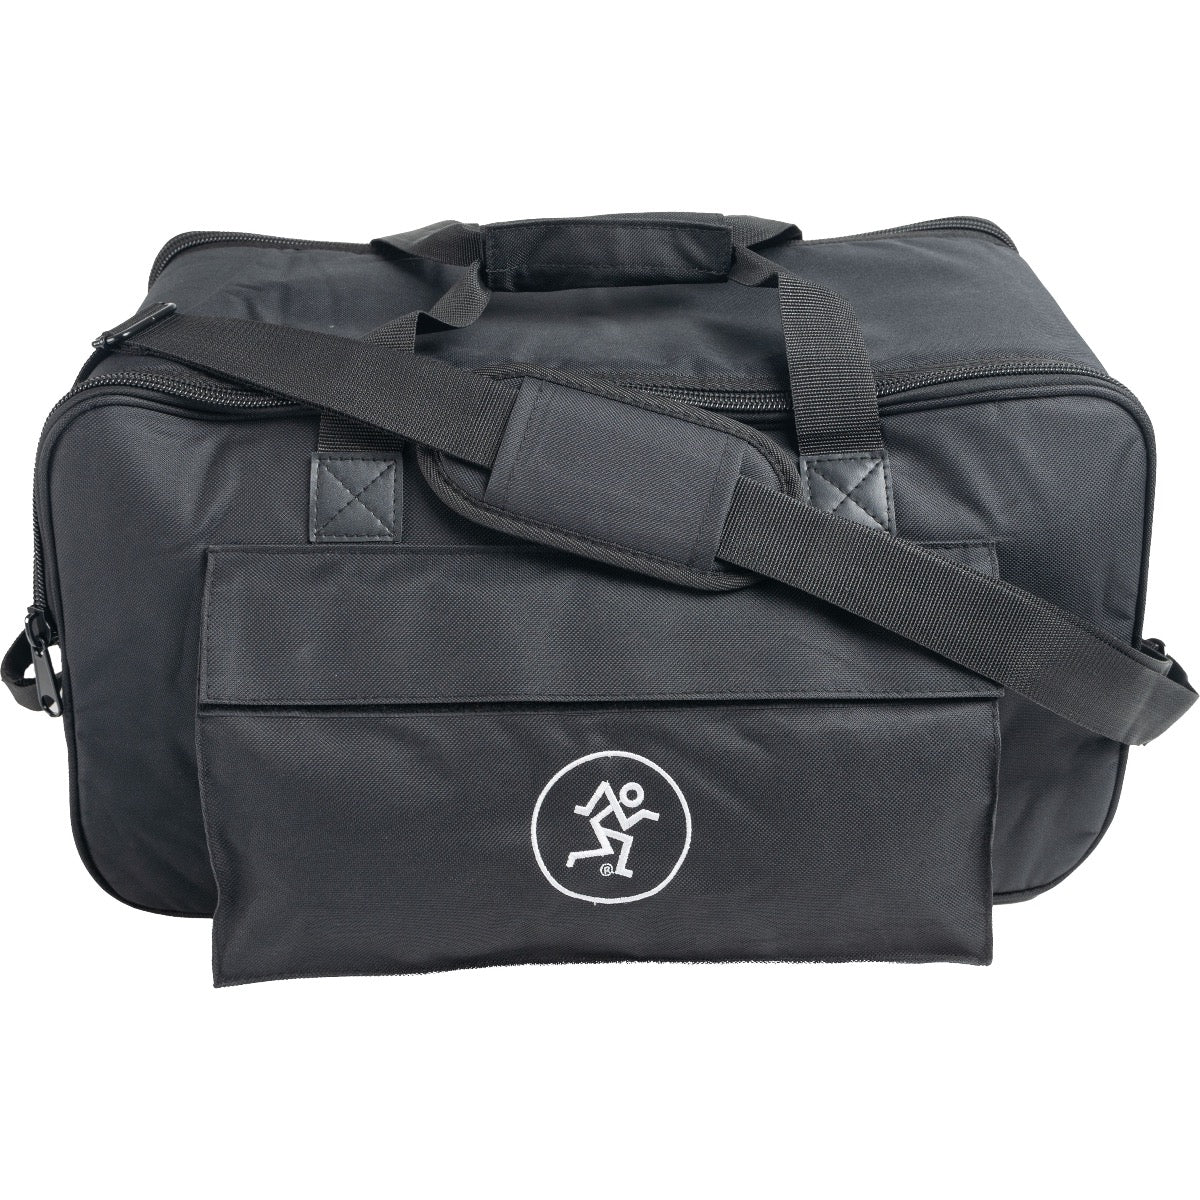 Perspective view of Mackie Thump Go Carry Bag showing front and top